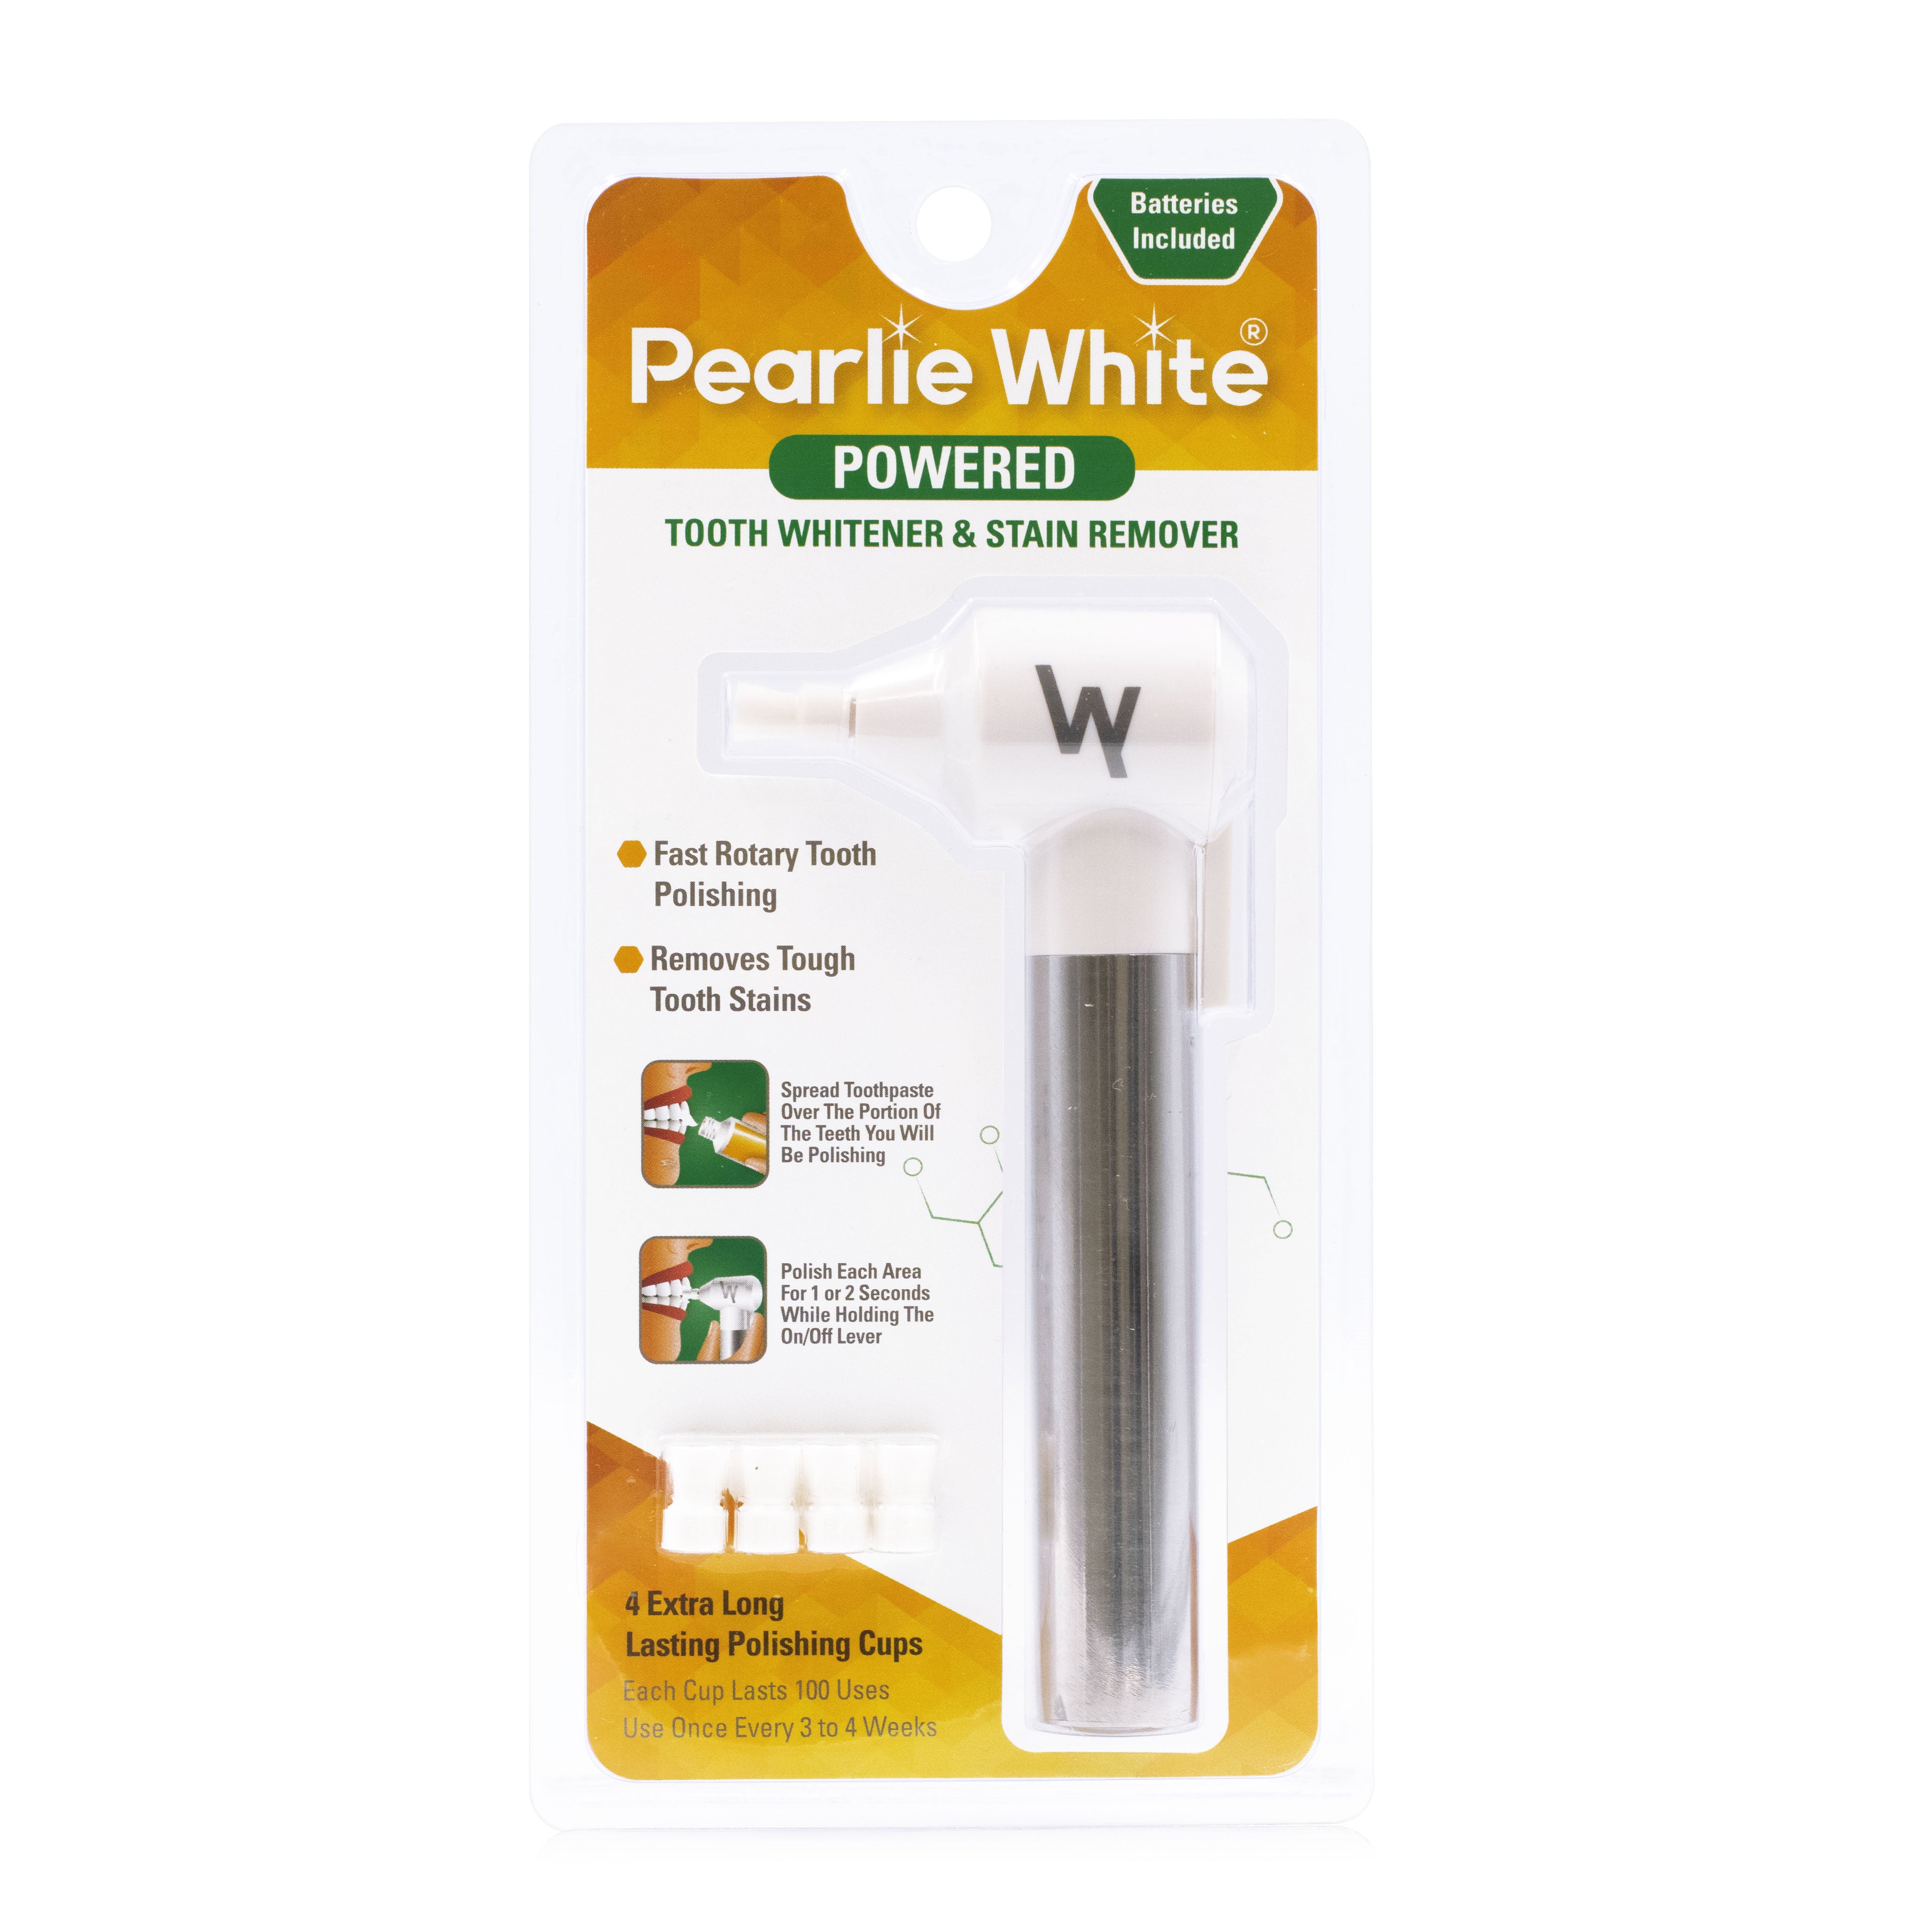 Powered Tooth Whitener & Stain Remover